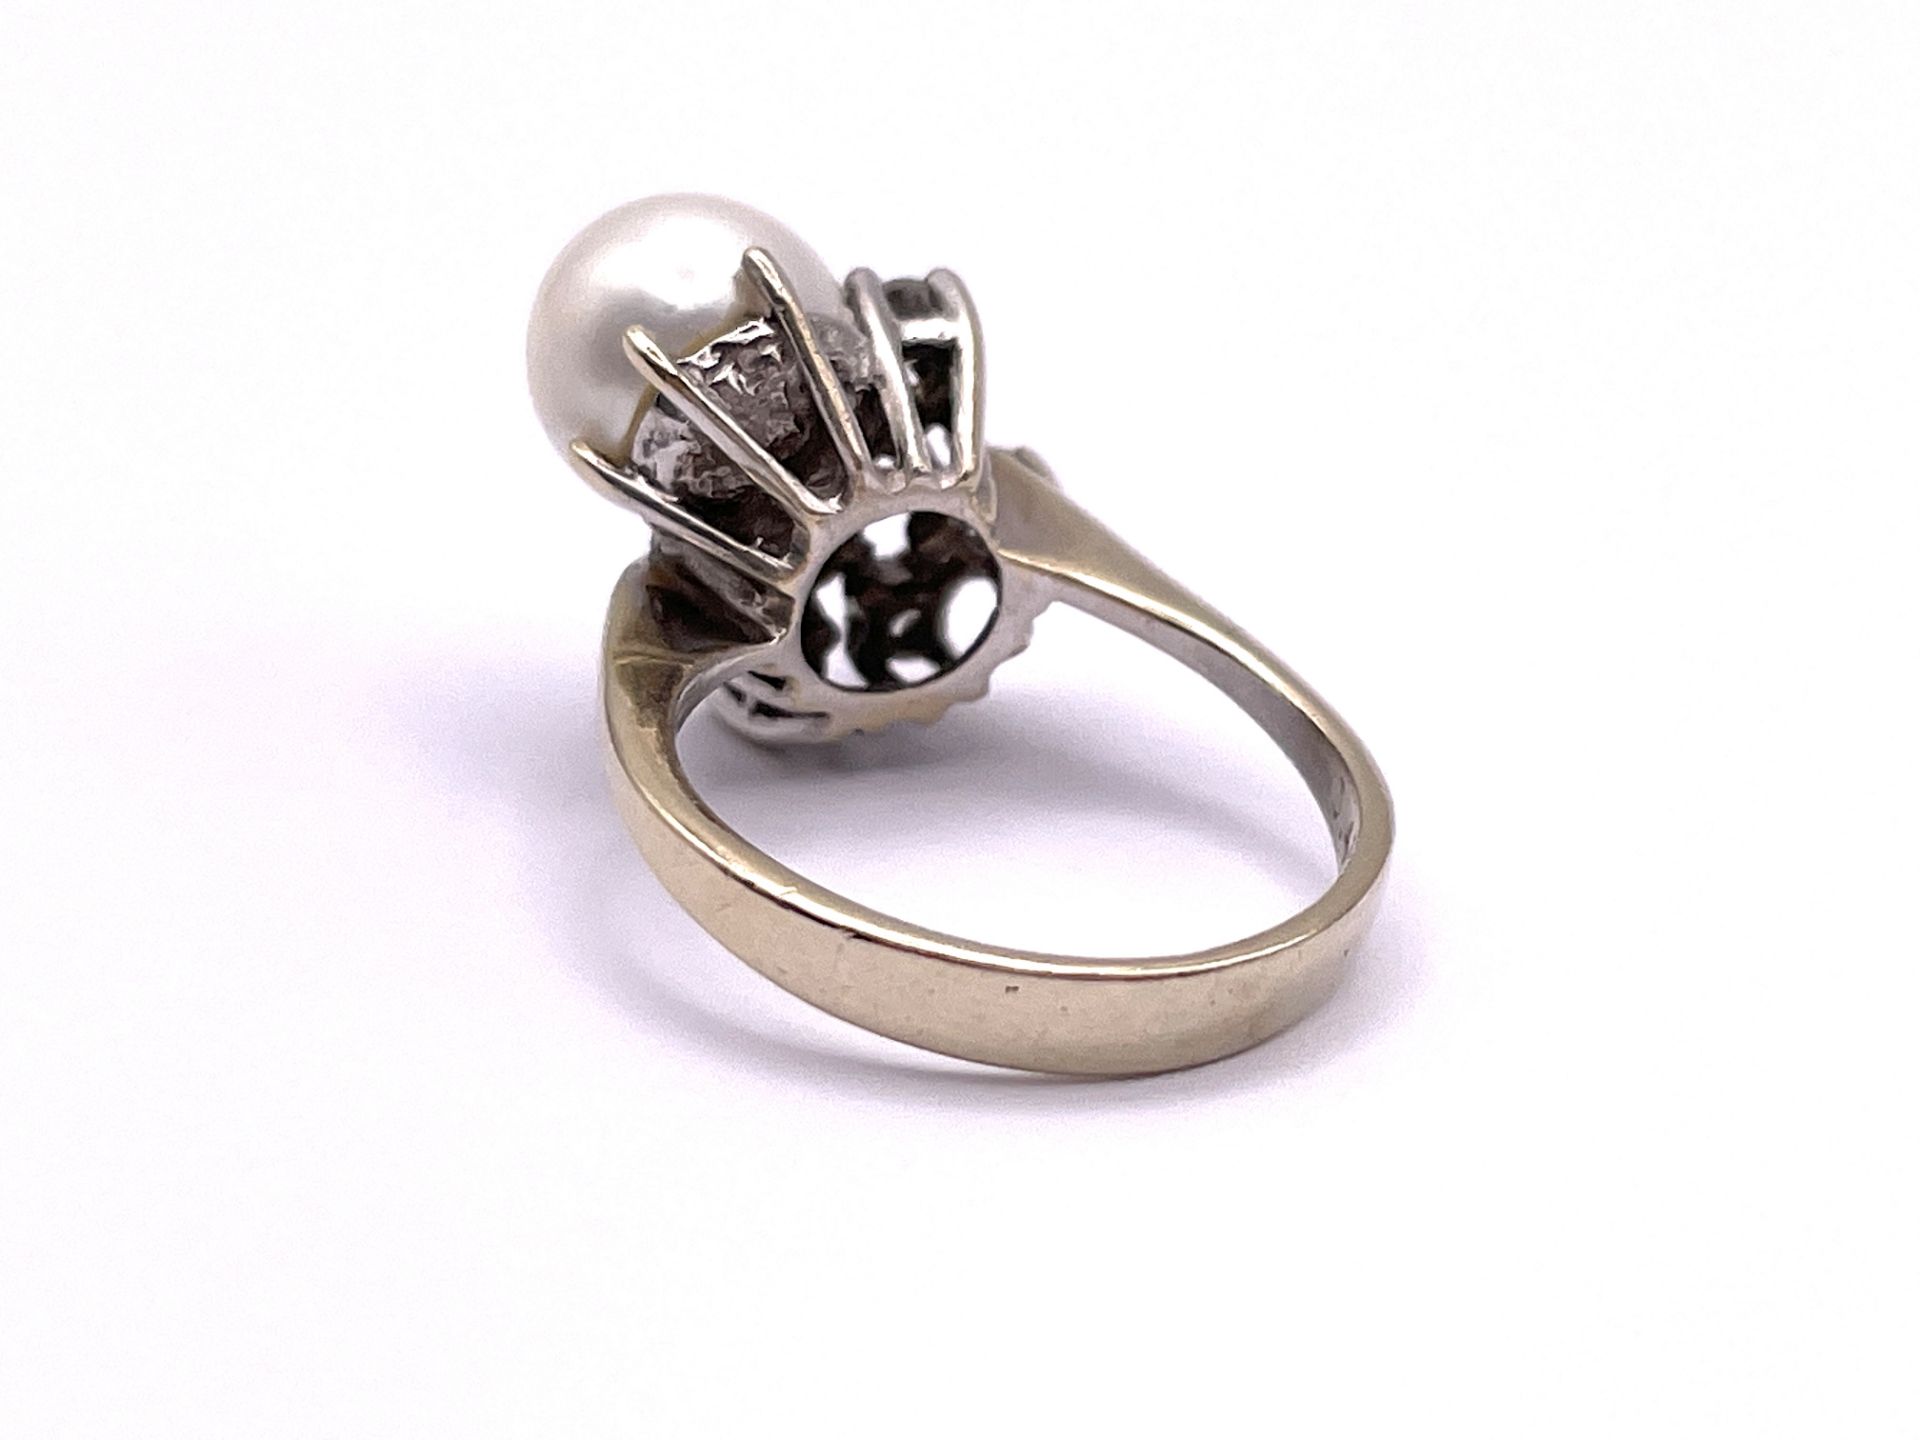 Pearl ring - Image 7 of 7